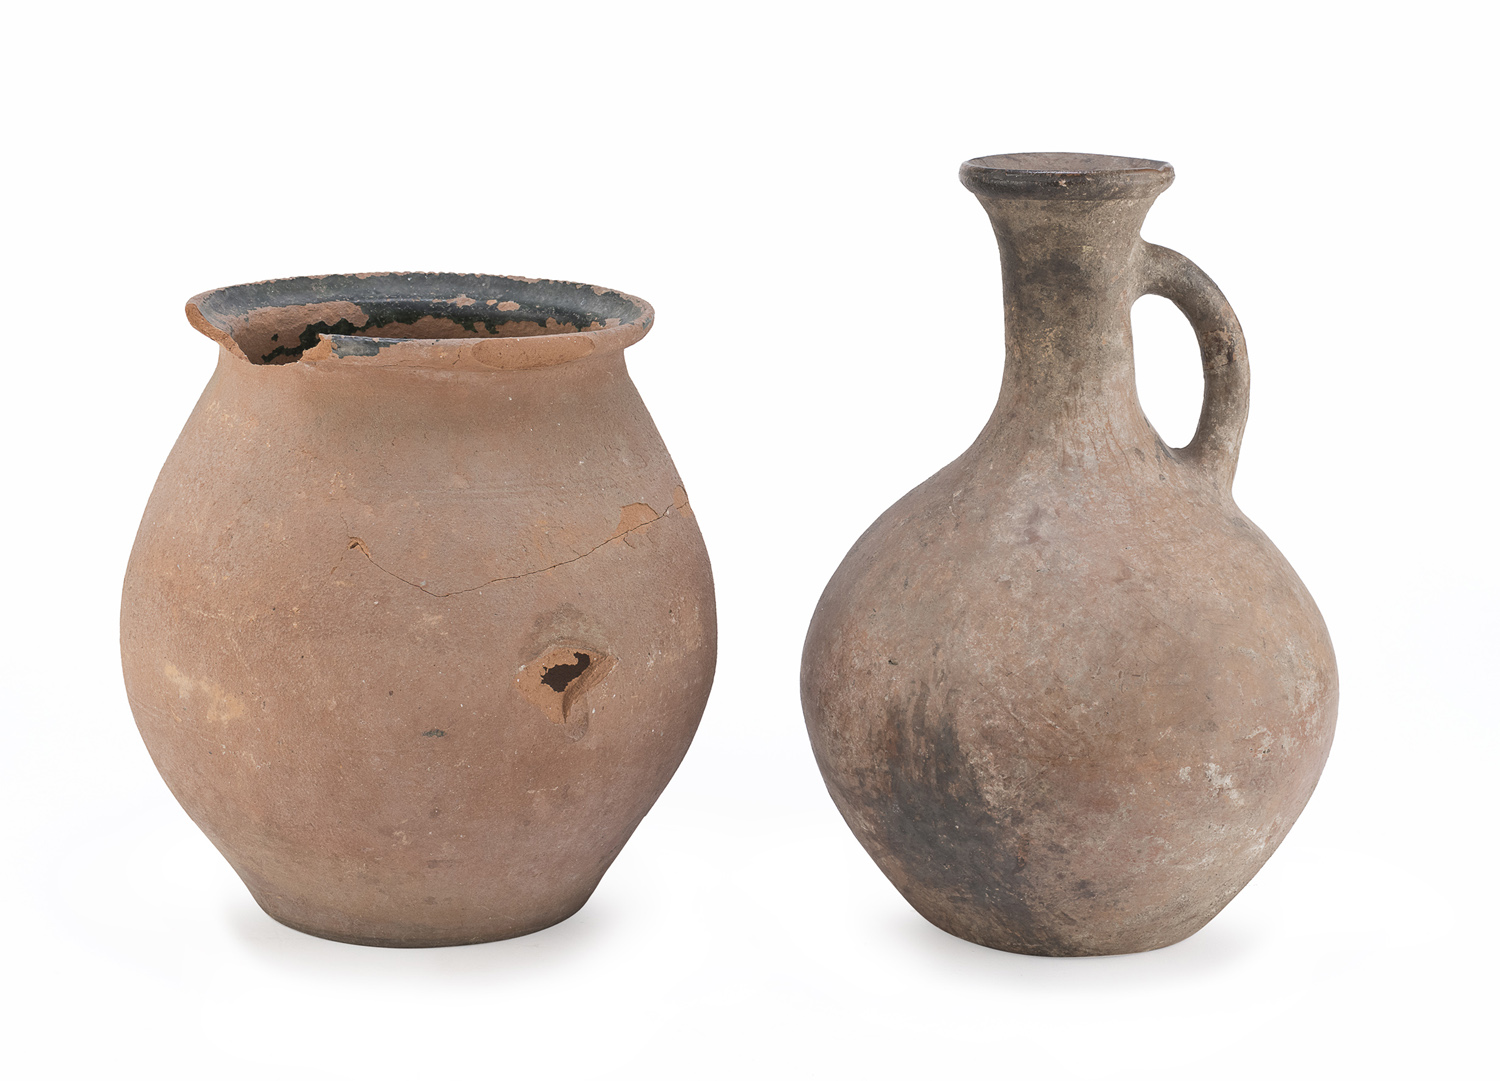 TERRACOTTA JUG AND JAR EARLY 20TH CENTURY